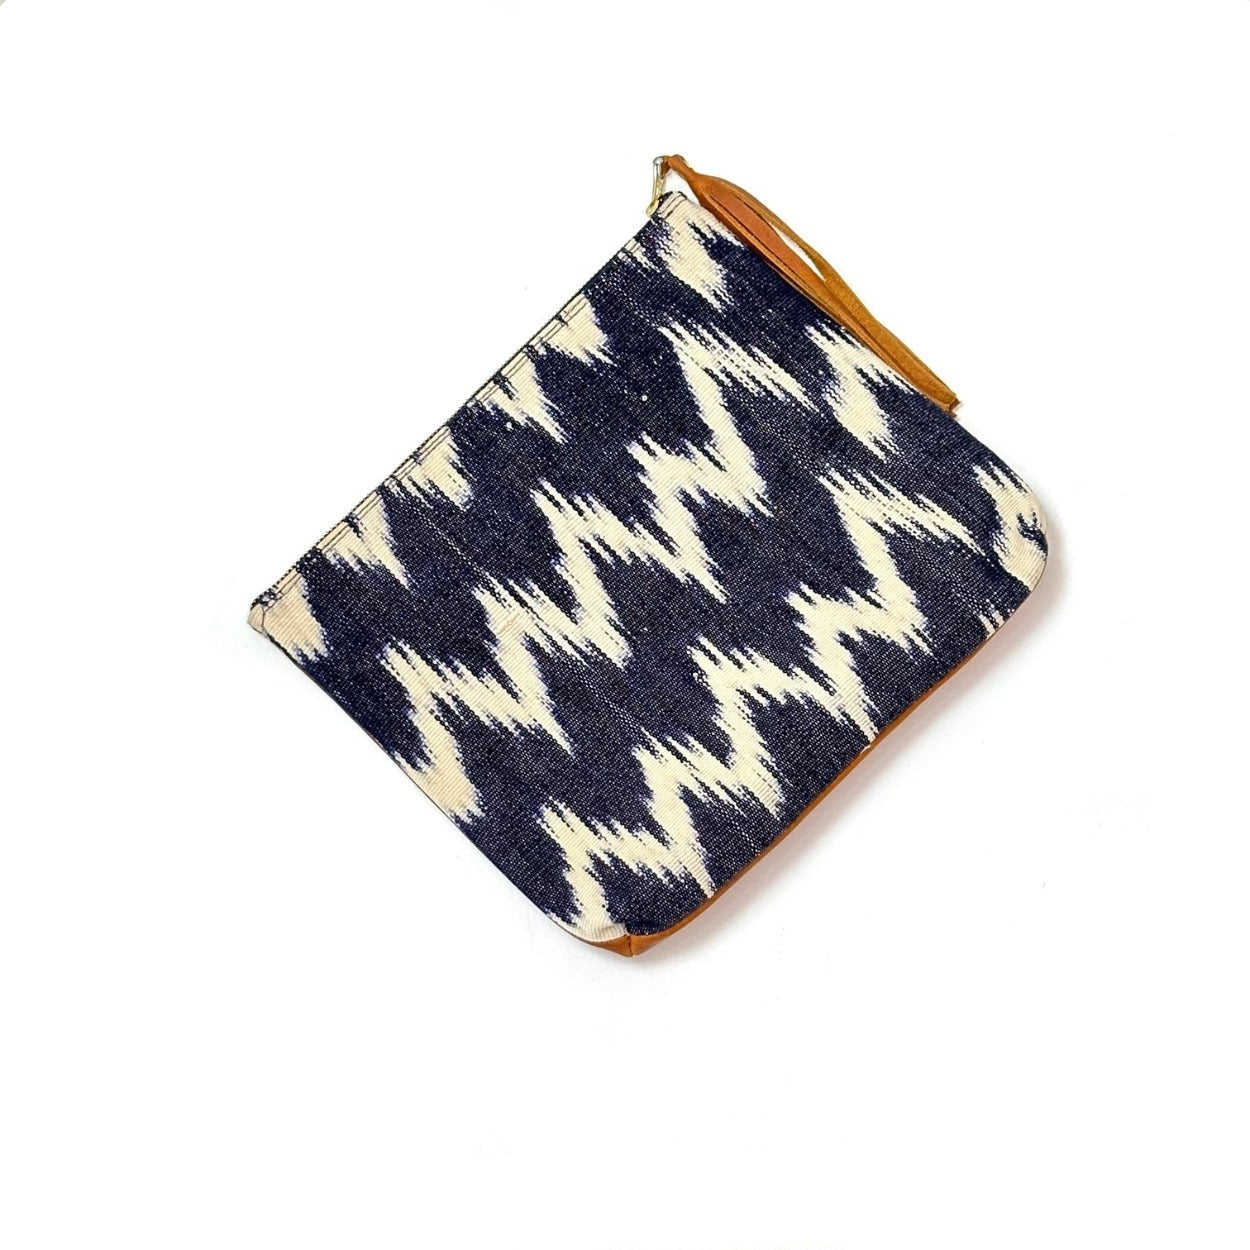 Volcano Azul Ikat Clutch with Tan Leather